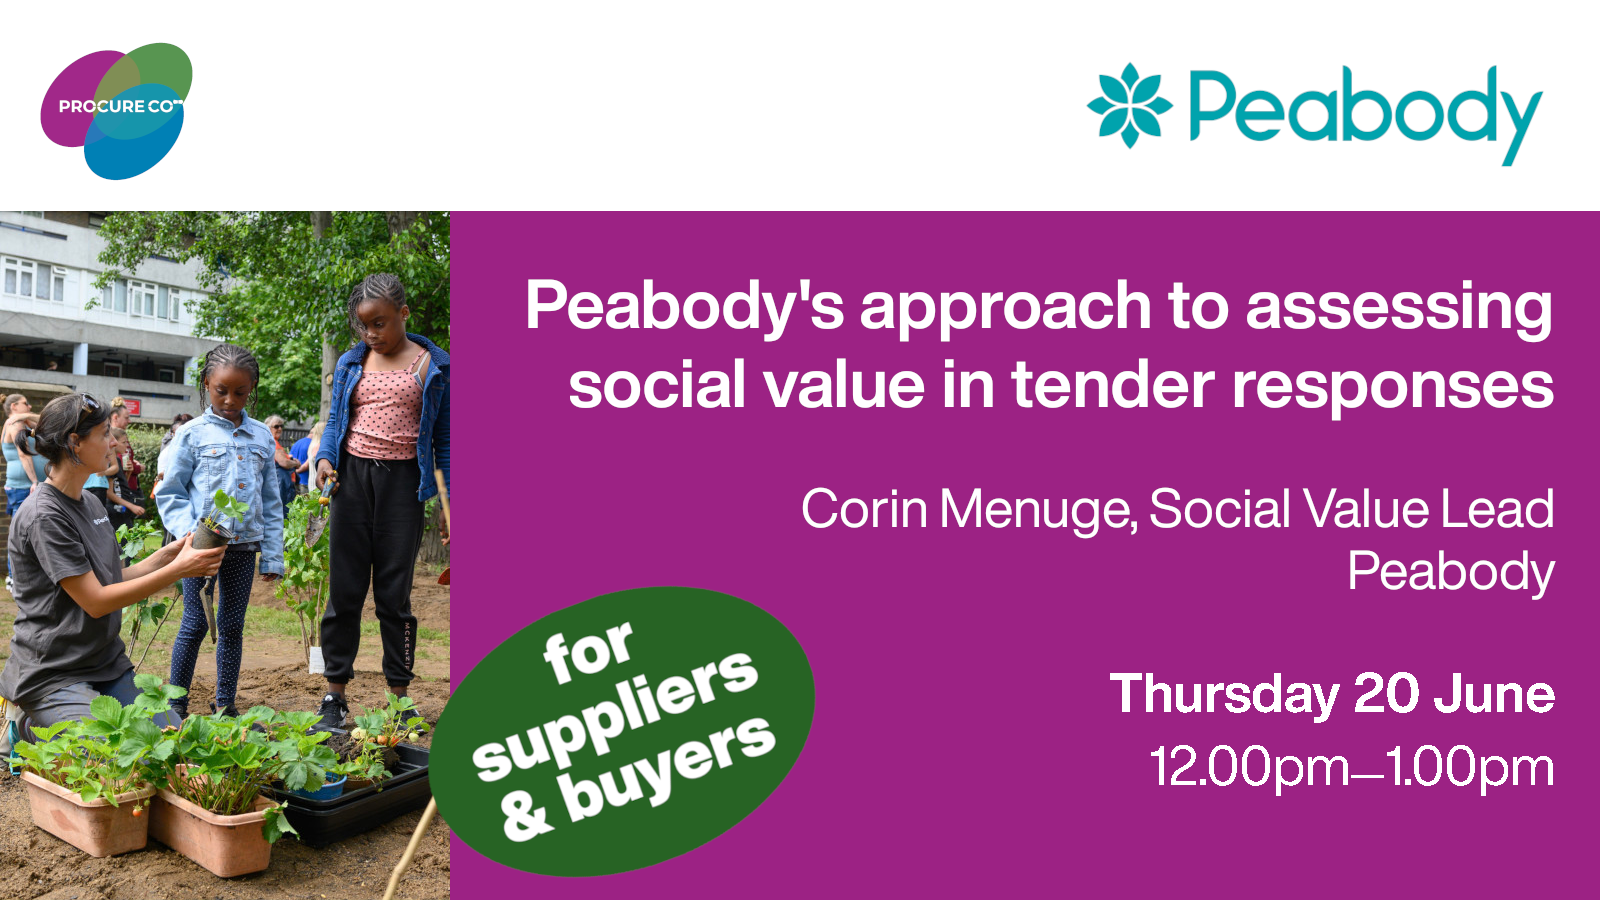 Corin Menuge, Peabody Social Value Lead on 'Peabody's approach to assessing social value in tender responses'